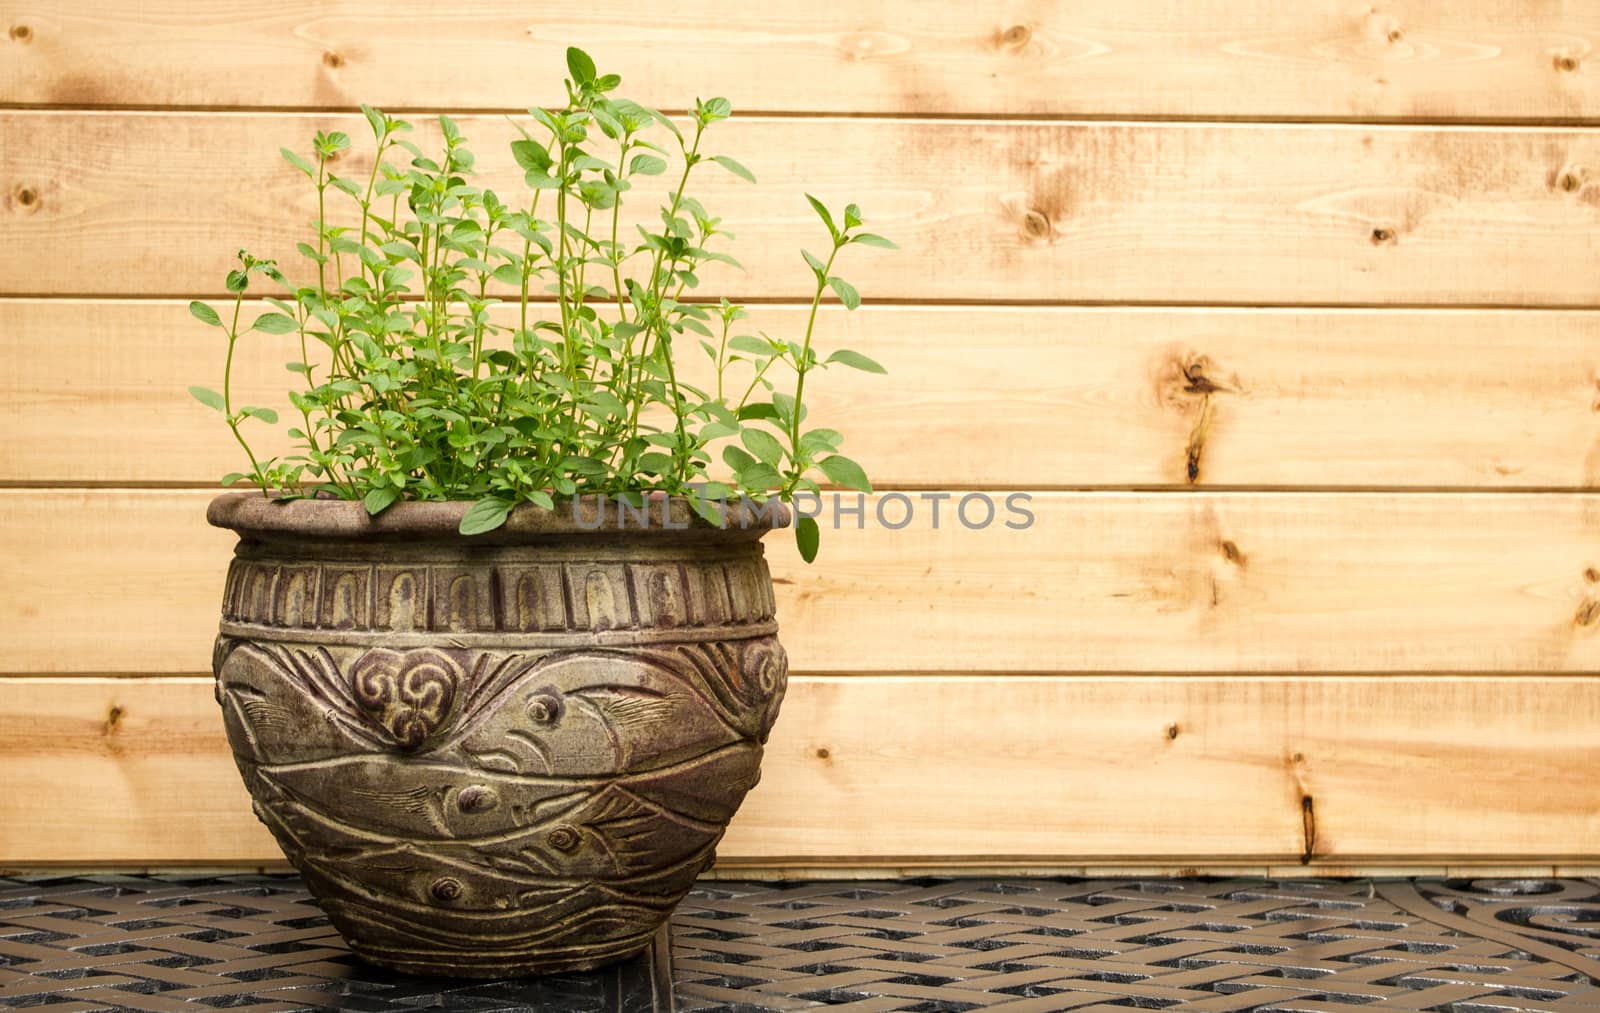 Oregano Plant in Decorative Clay Pot by krisblackphotography